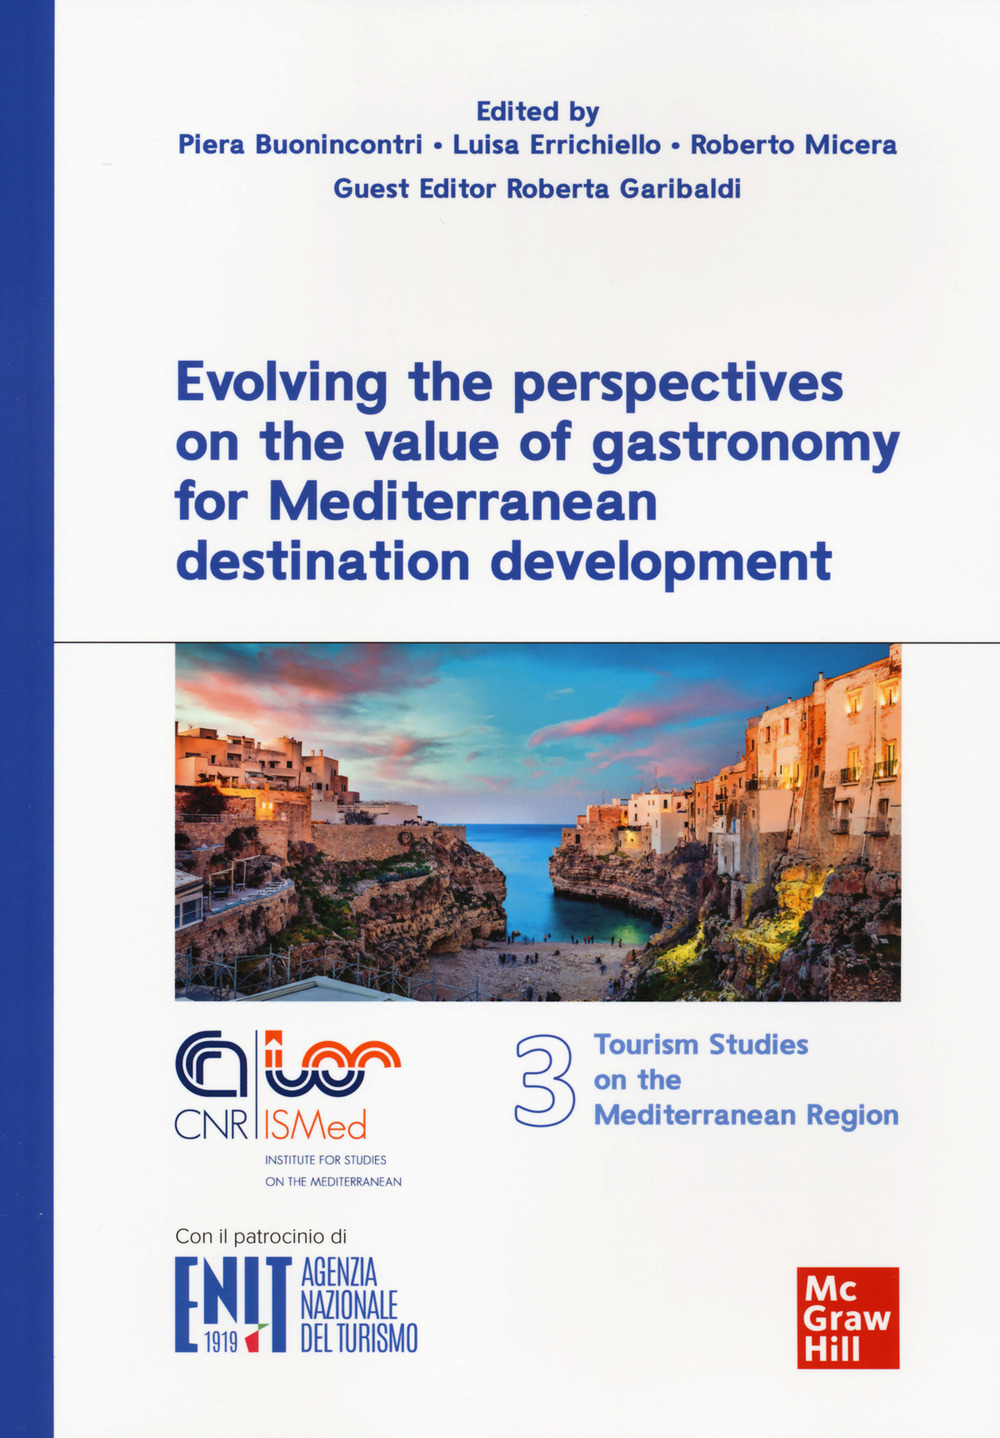 Evolving the perspectives on the value of gastronomy for Mediterranean destination development